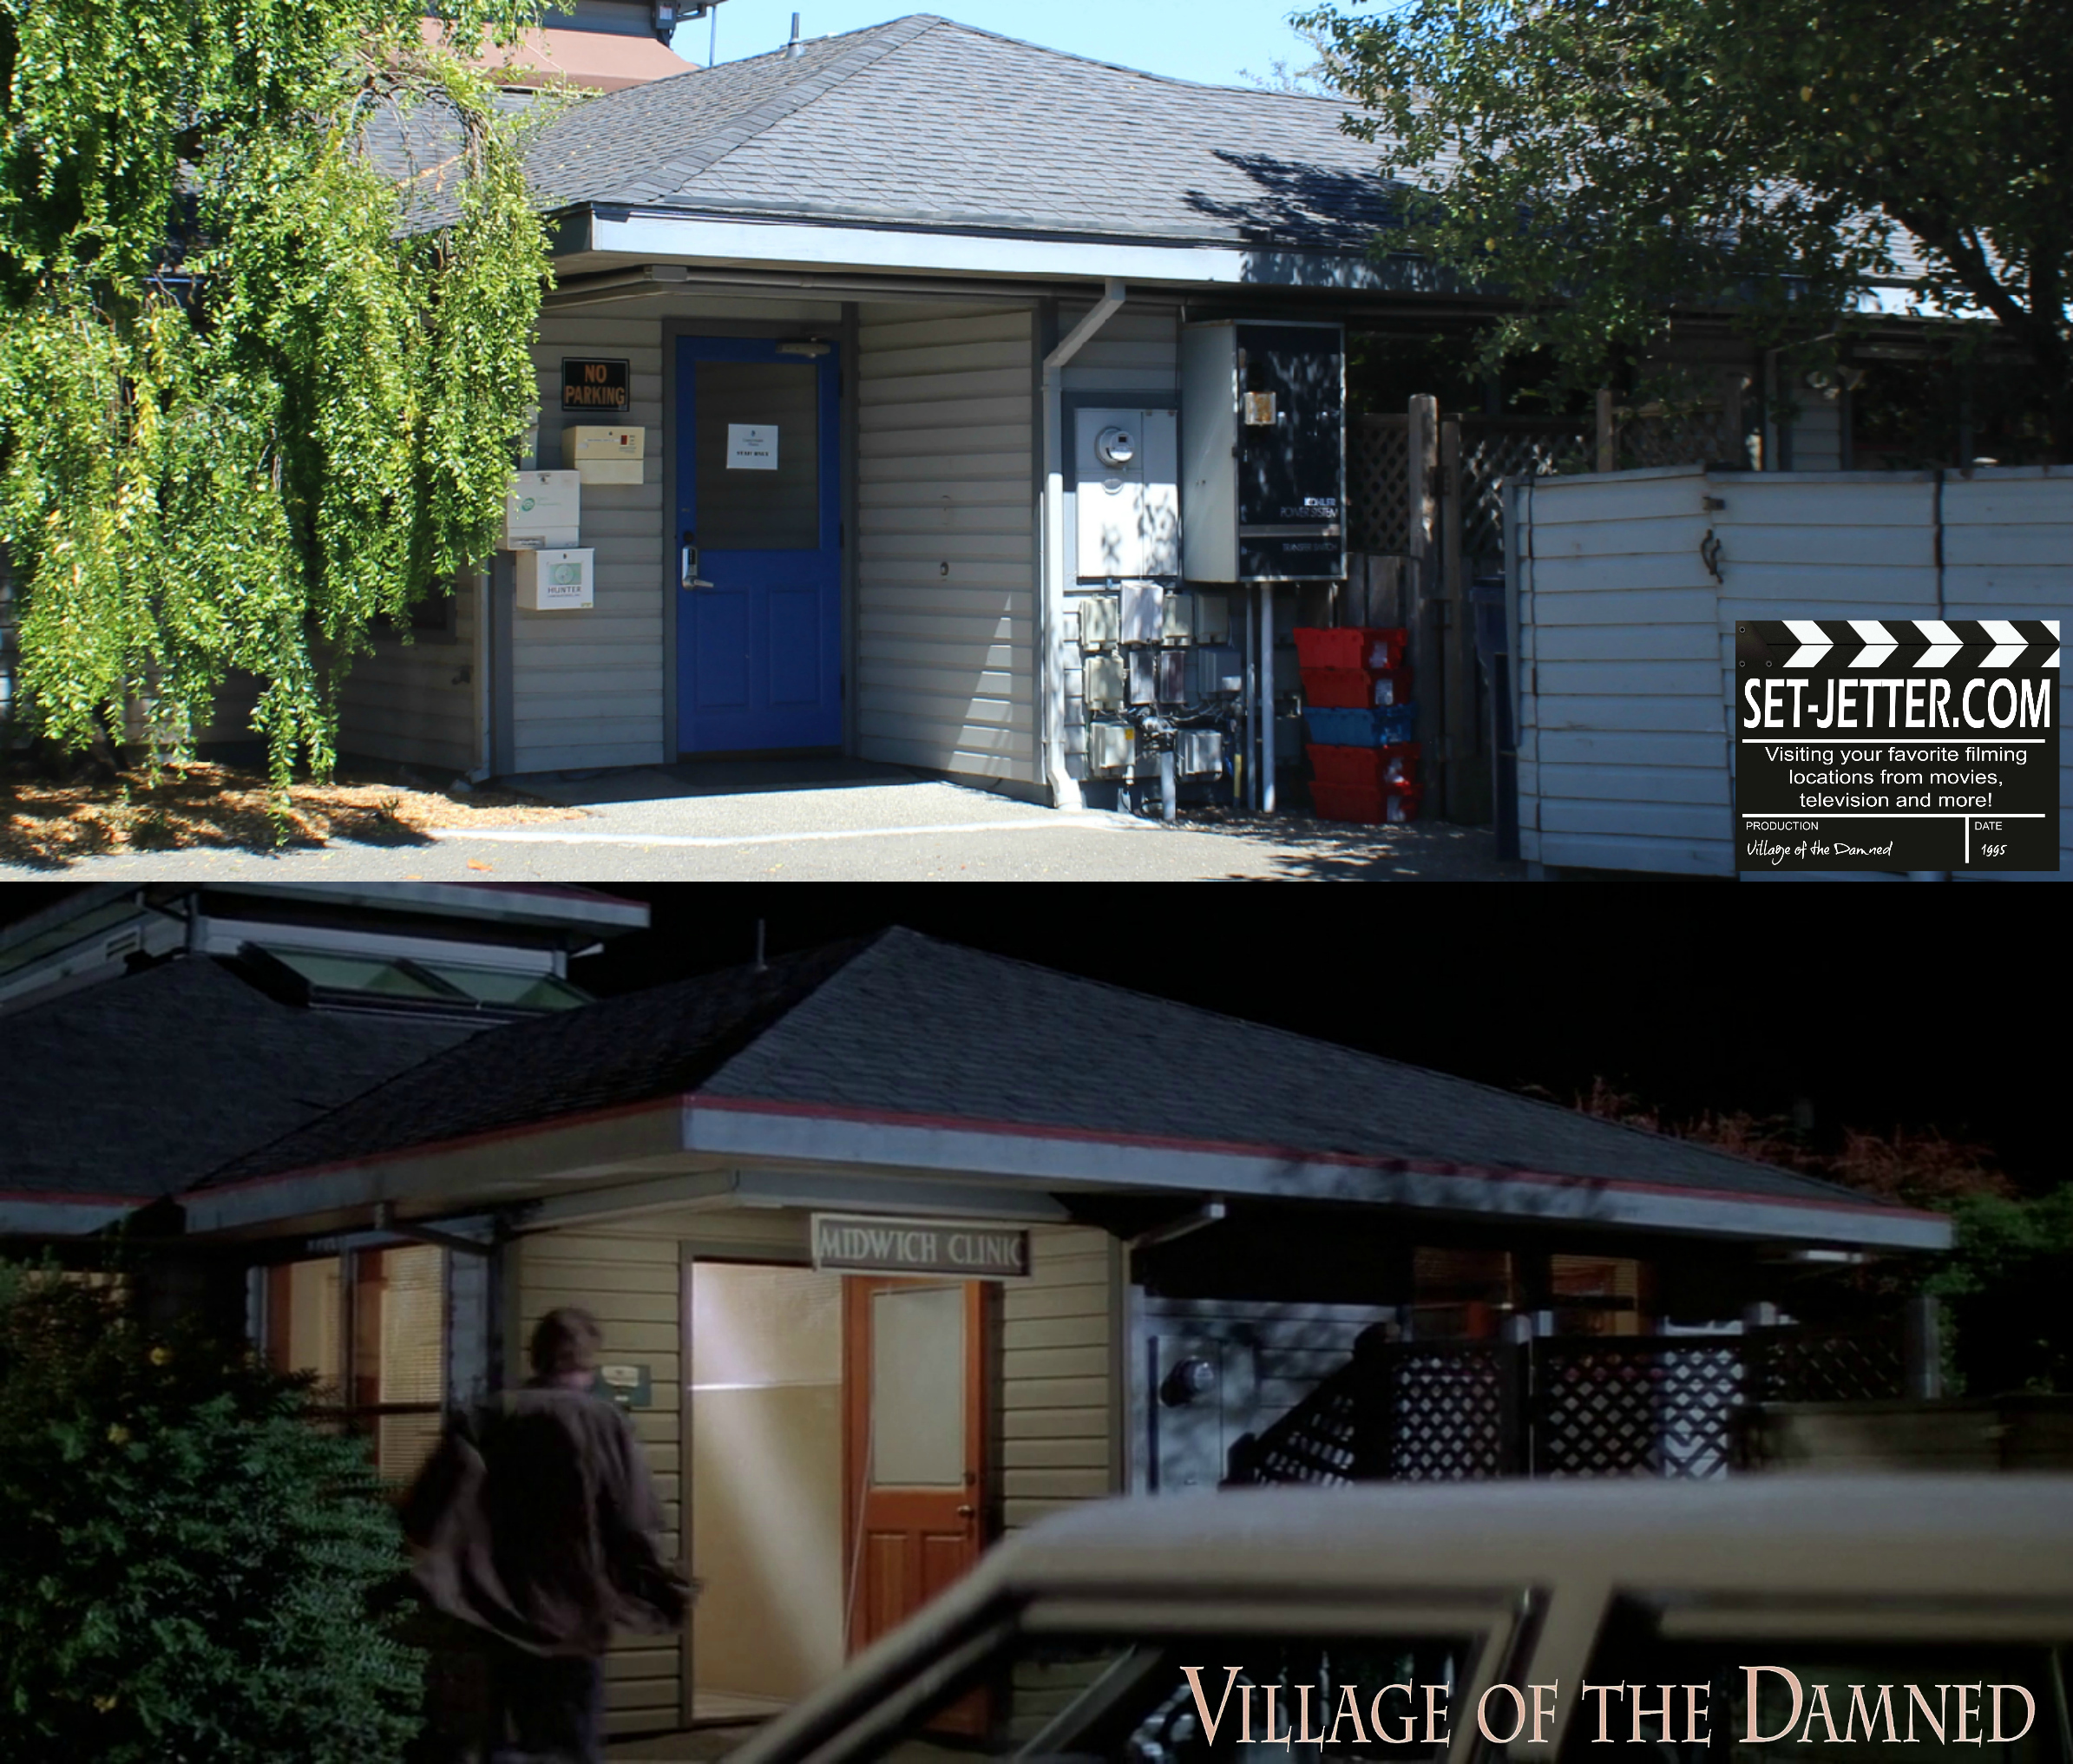 Village of the Damned comparison 144.jpg